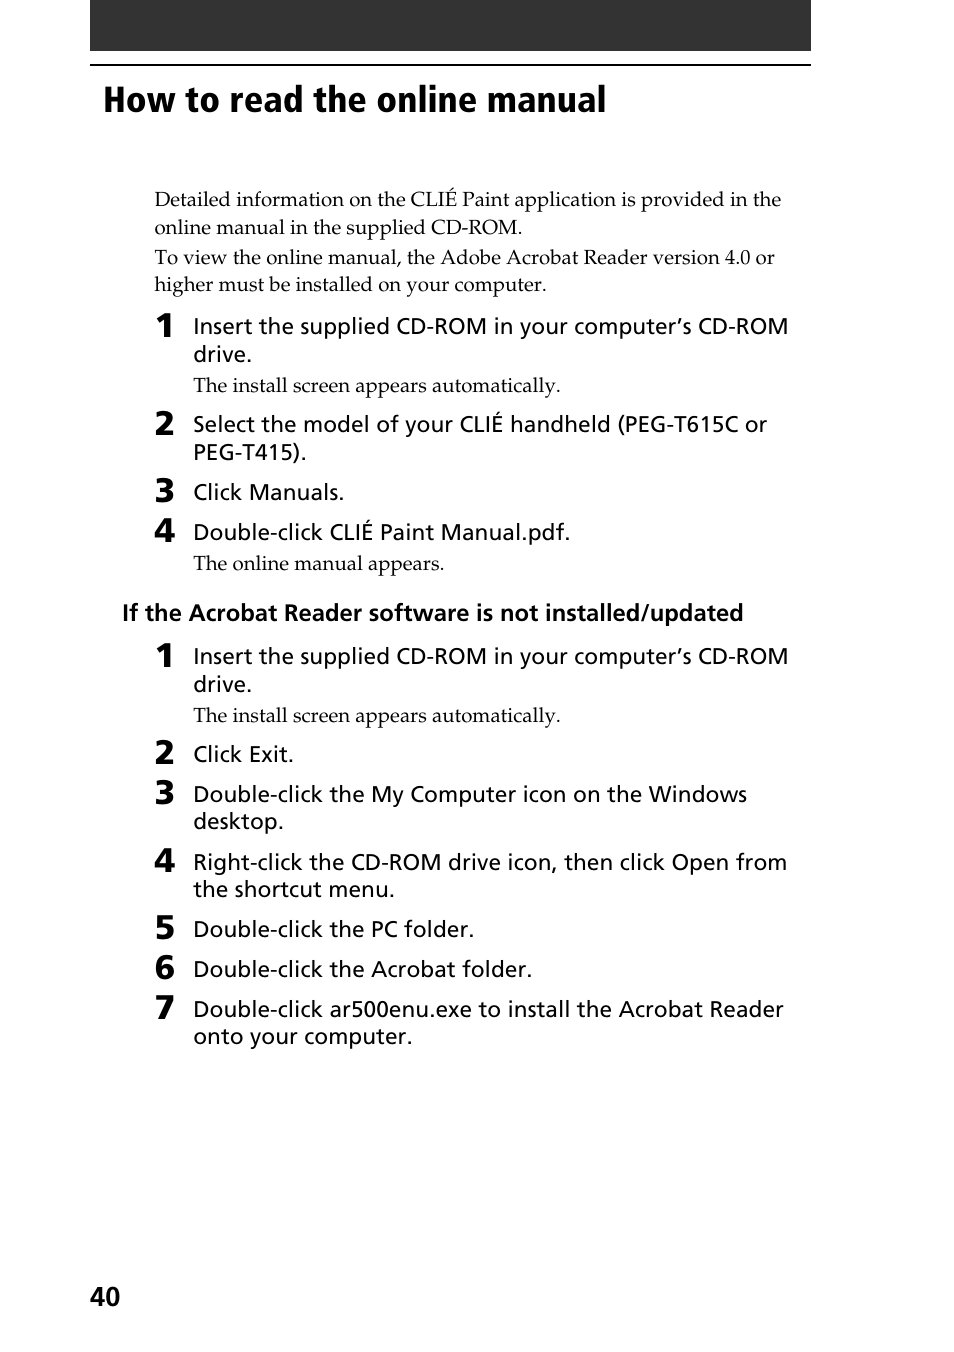 How to read the online manual | Sony PEG-T615C User Manual | Page 40 / 104